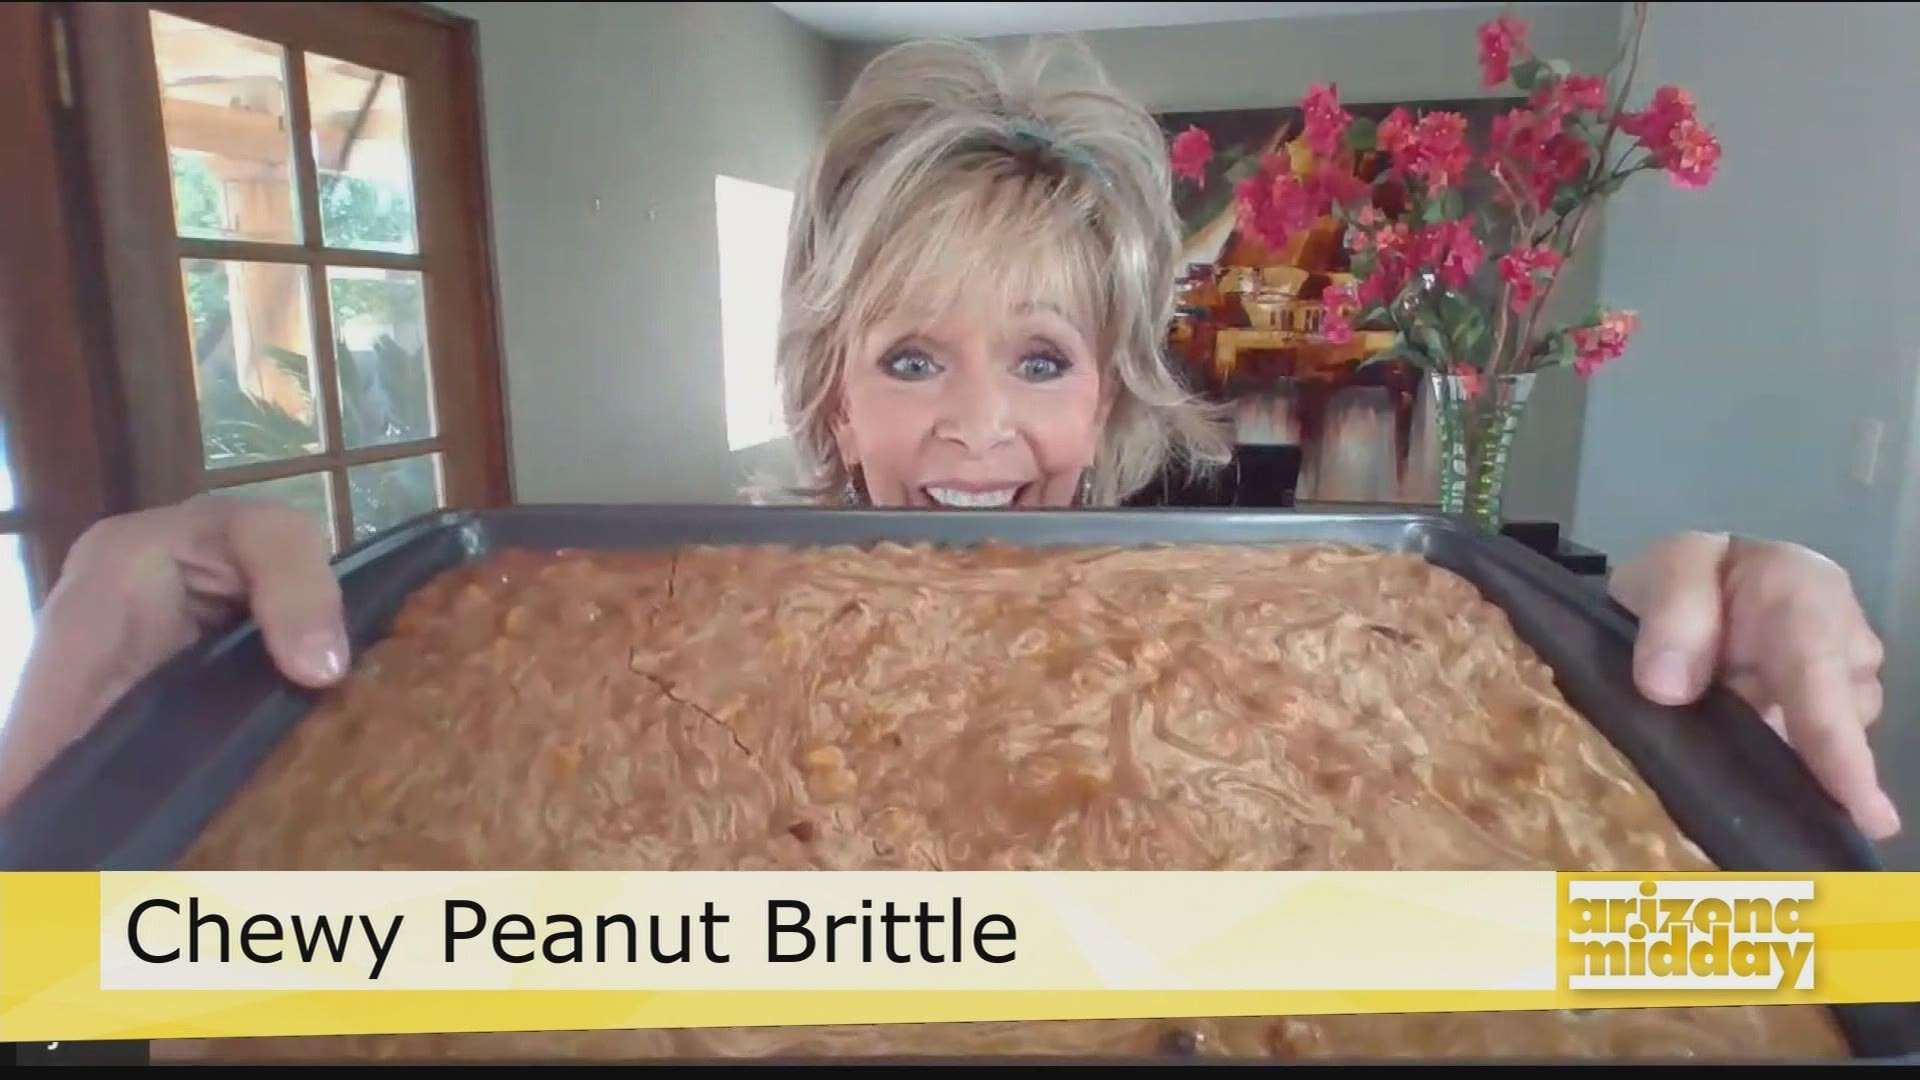 Jan shows us how to create chewy peanut brittle